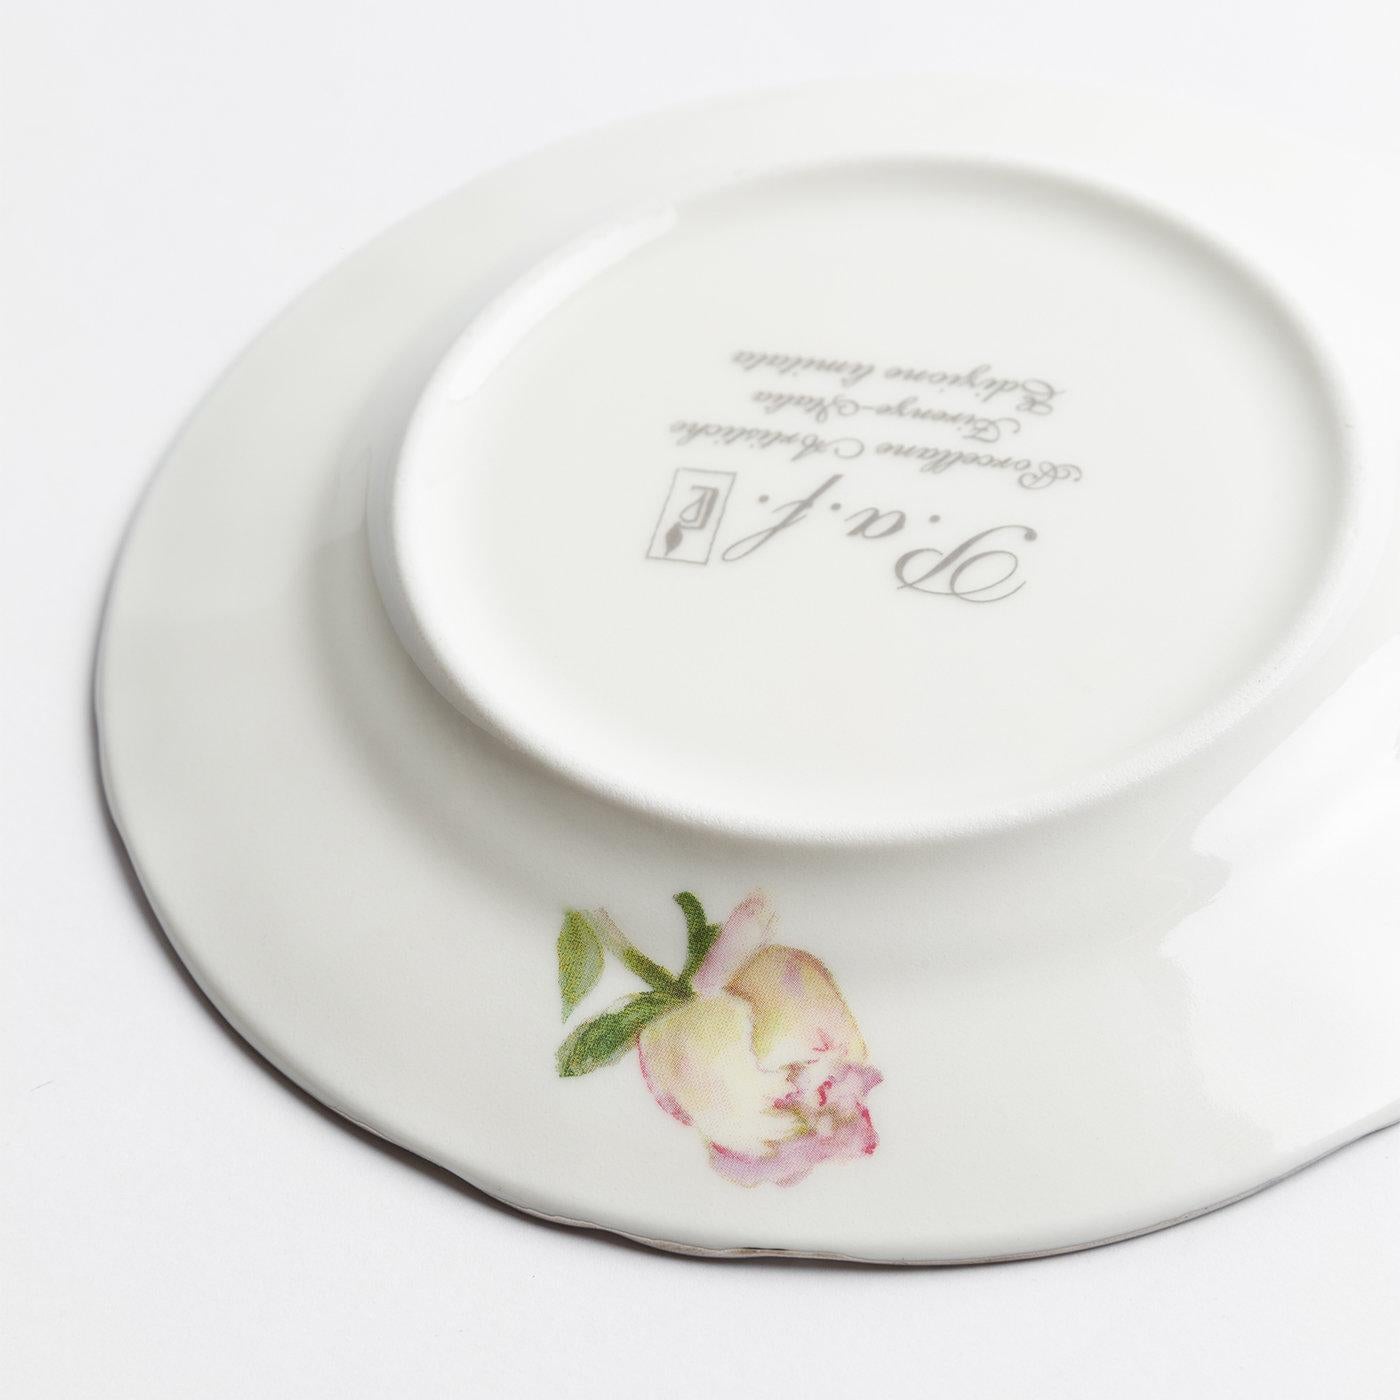 Bocci di Peonia Set of 4 Bread Plates by Paola Caselli In New Condition For Sale In Milan, IT